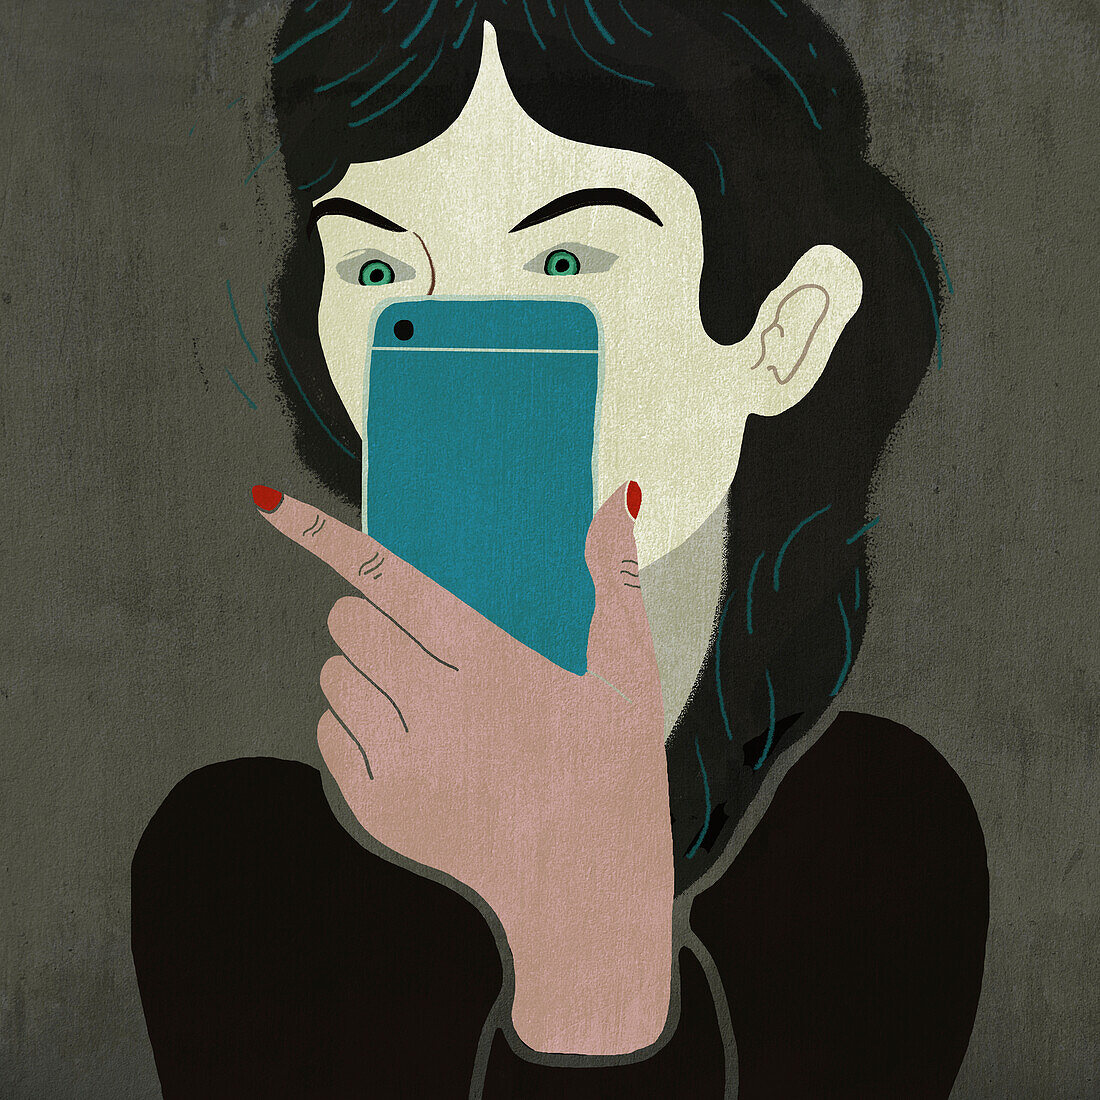 Woman using a mobile phone, illustration